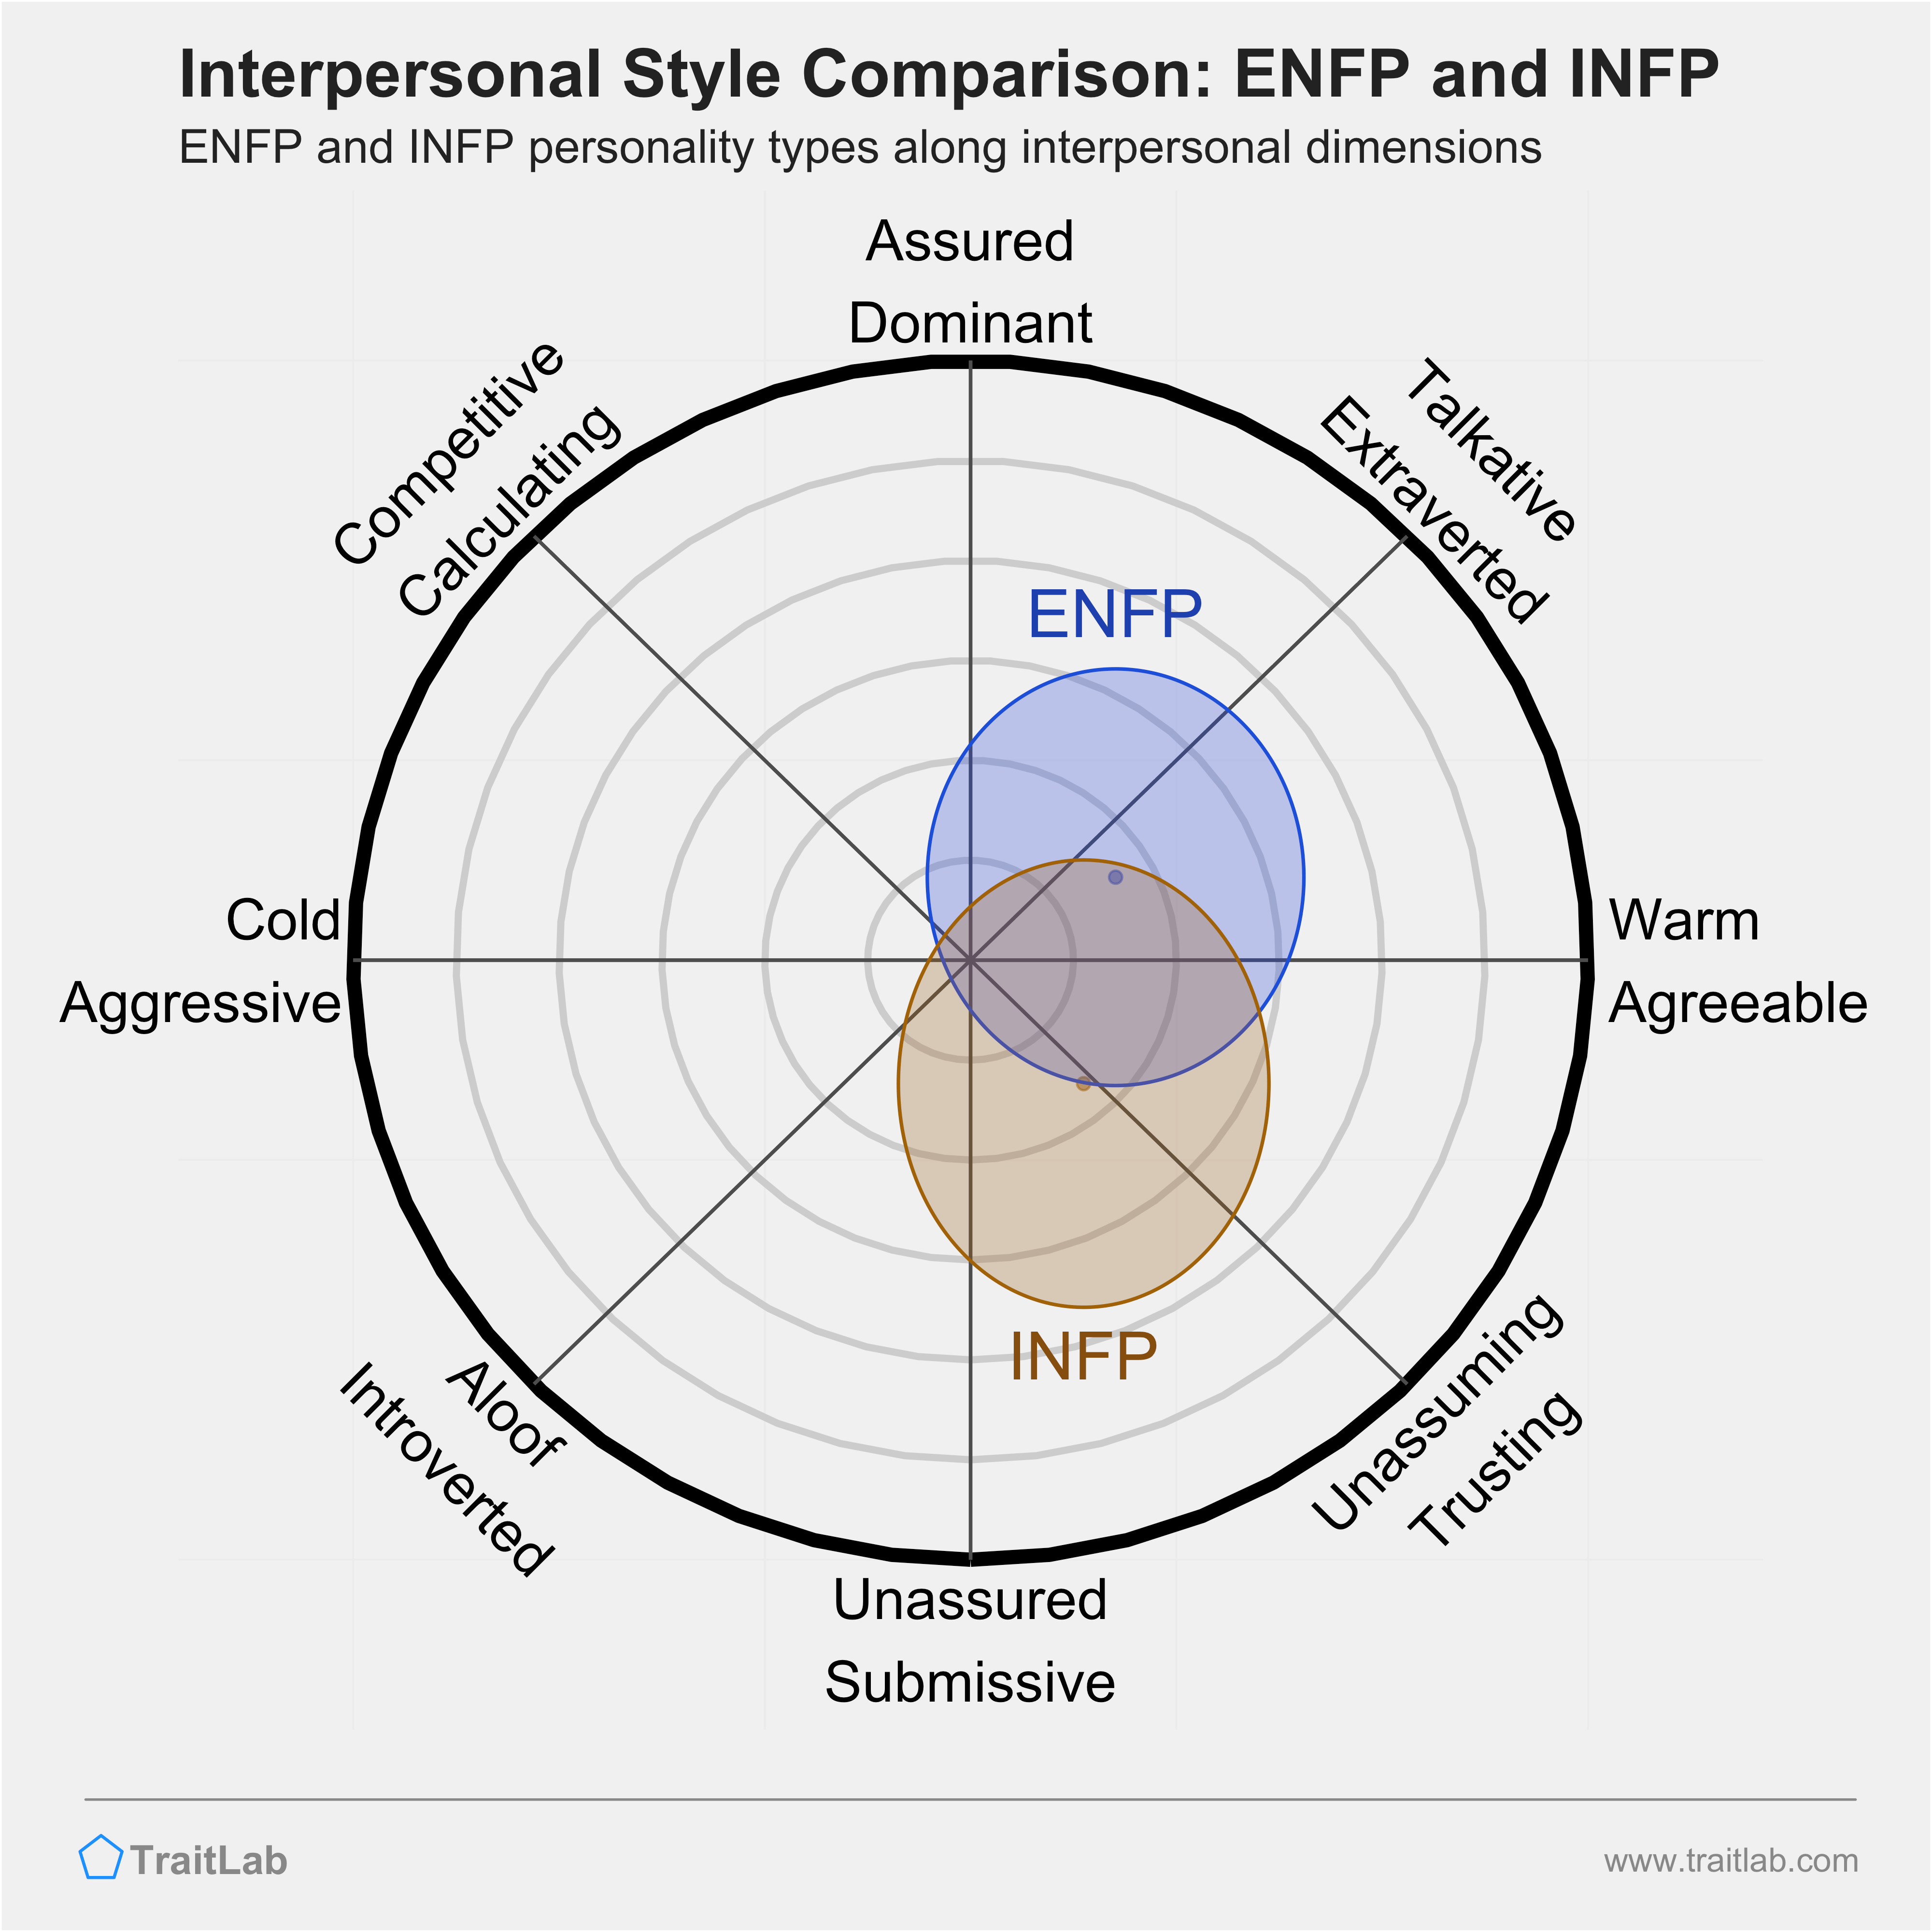 Which is most similar to INFP?